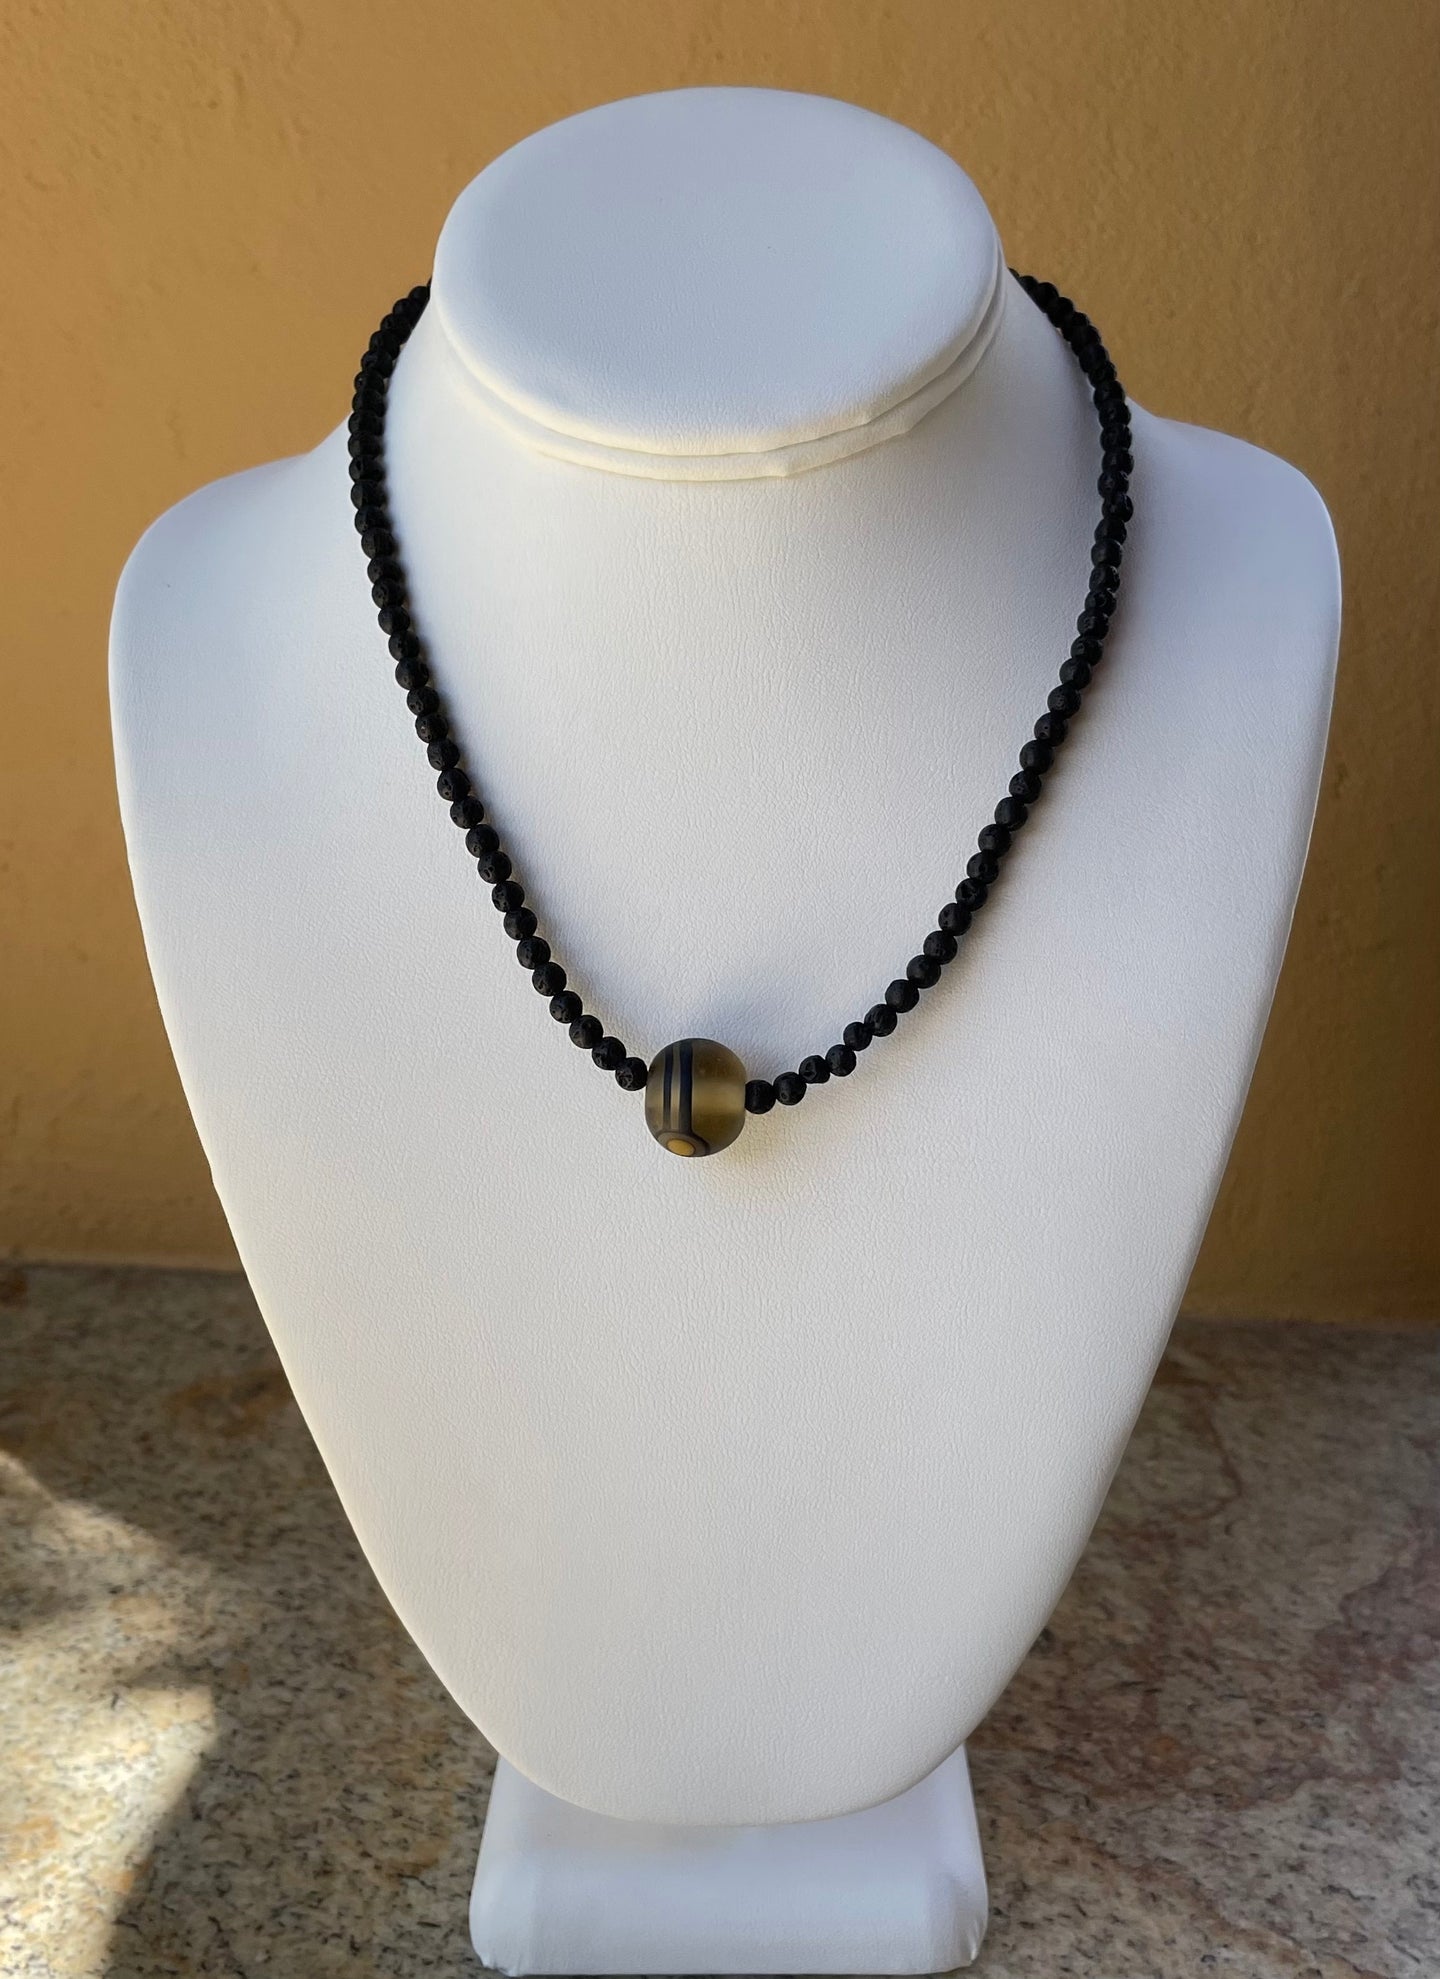 Necklace - Black lava stone round beads with a hand made glass focal point